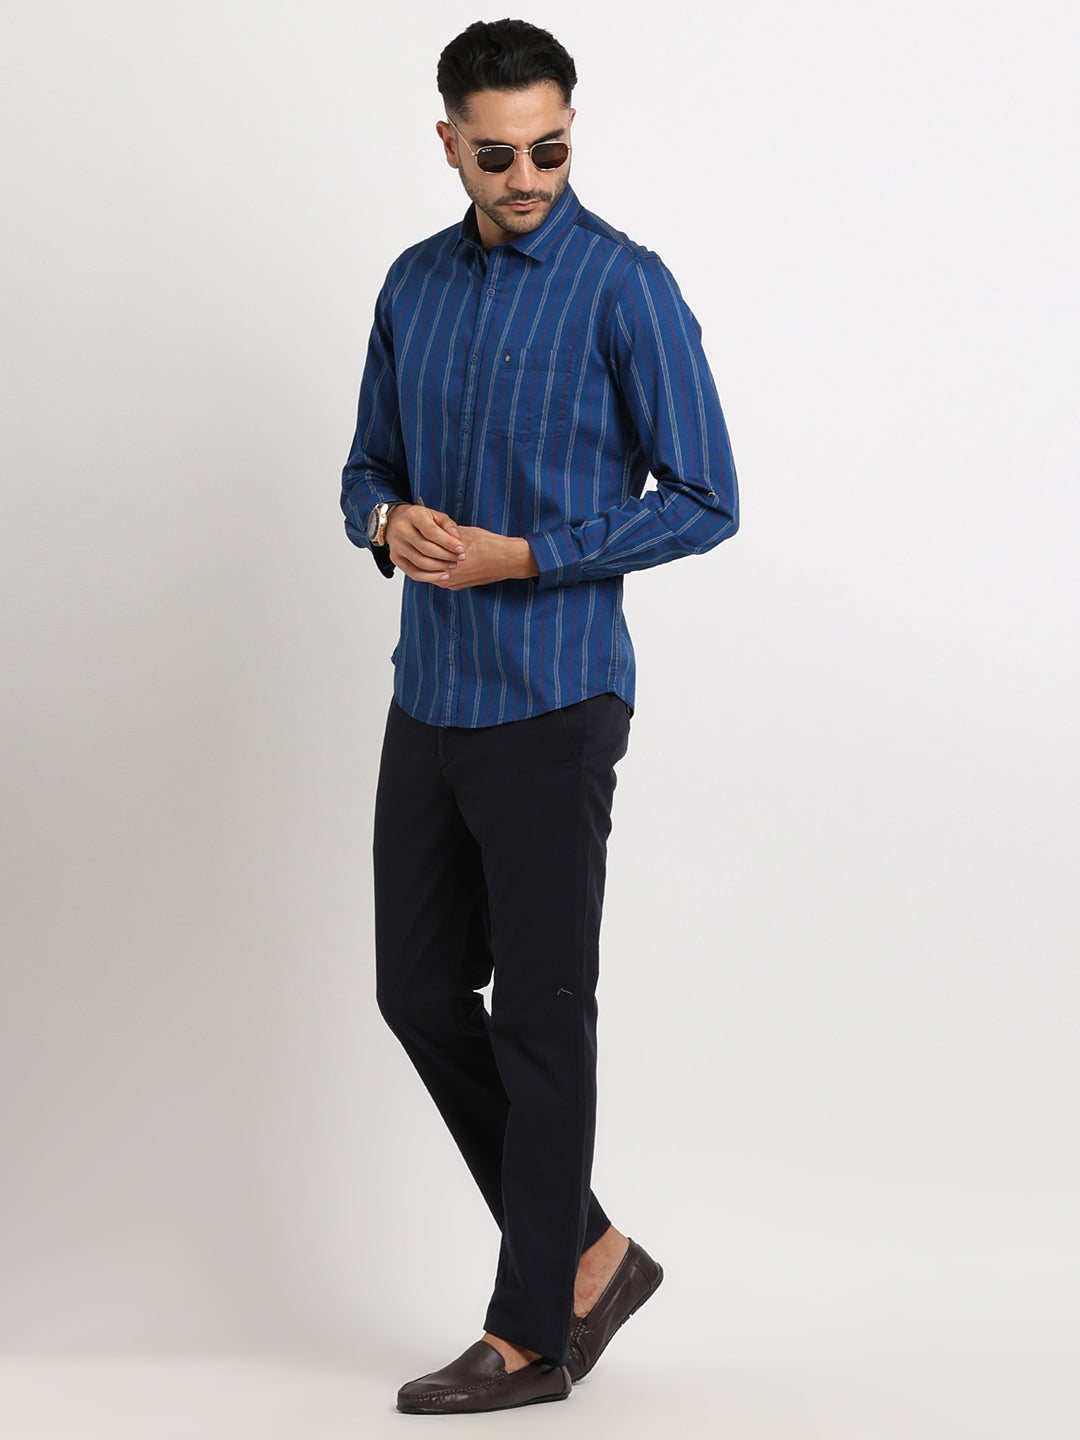 100% Cotton Blue Striped Slim Fit Full Sleeve Casual Shirt